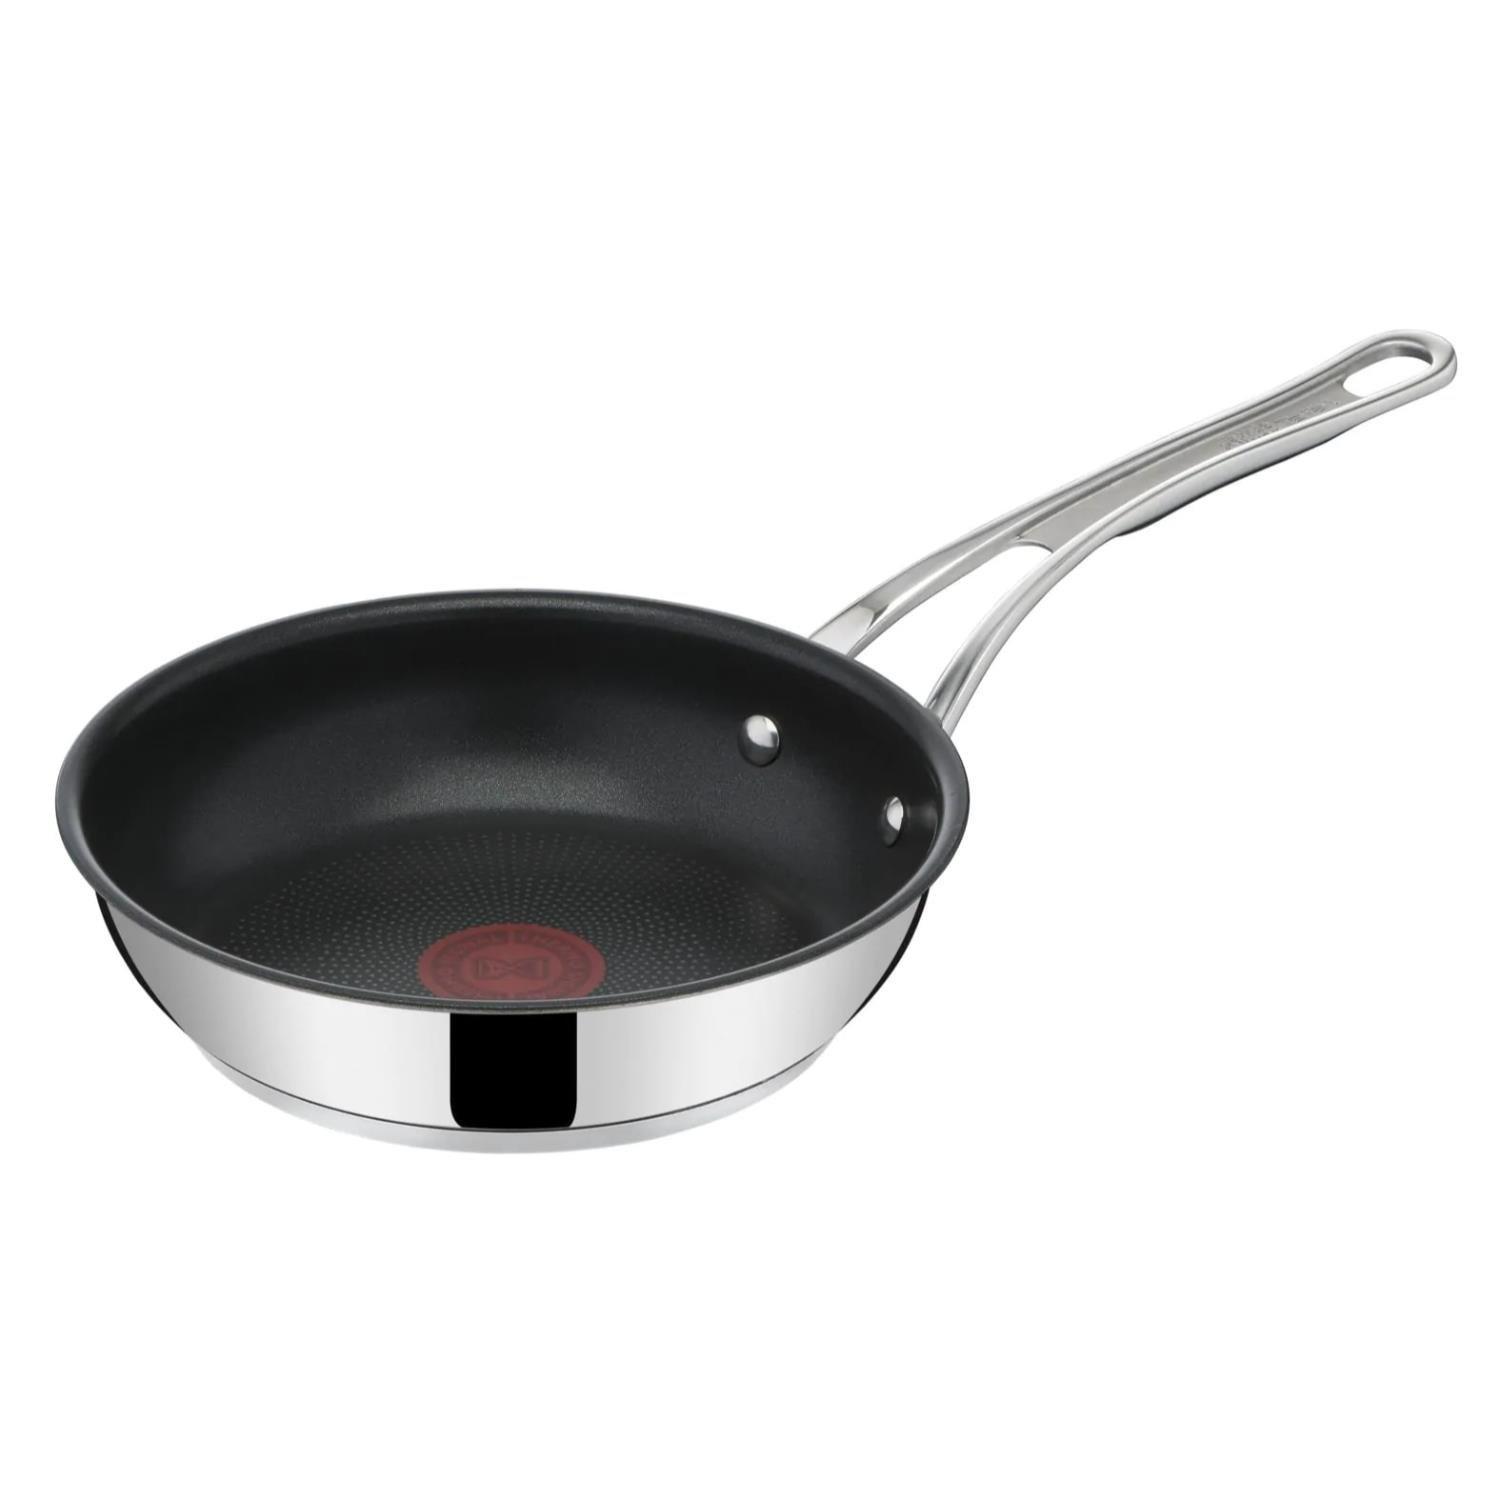 Jamie Oliver Cooks Classics Stainless Steel 28cm Frypan